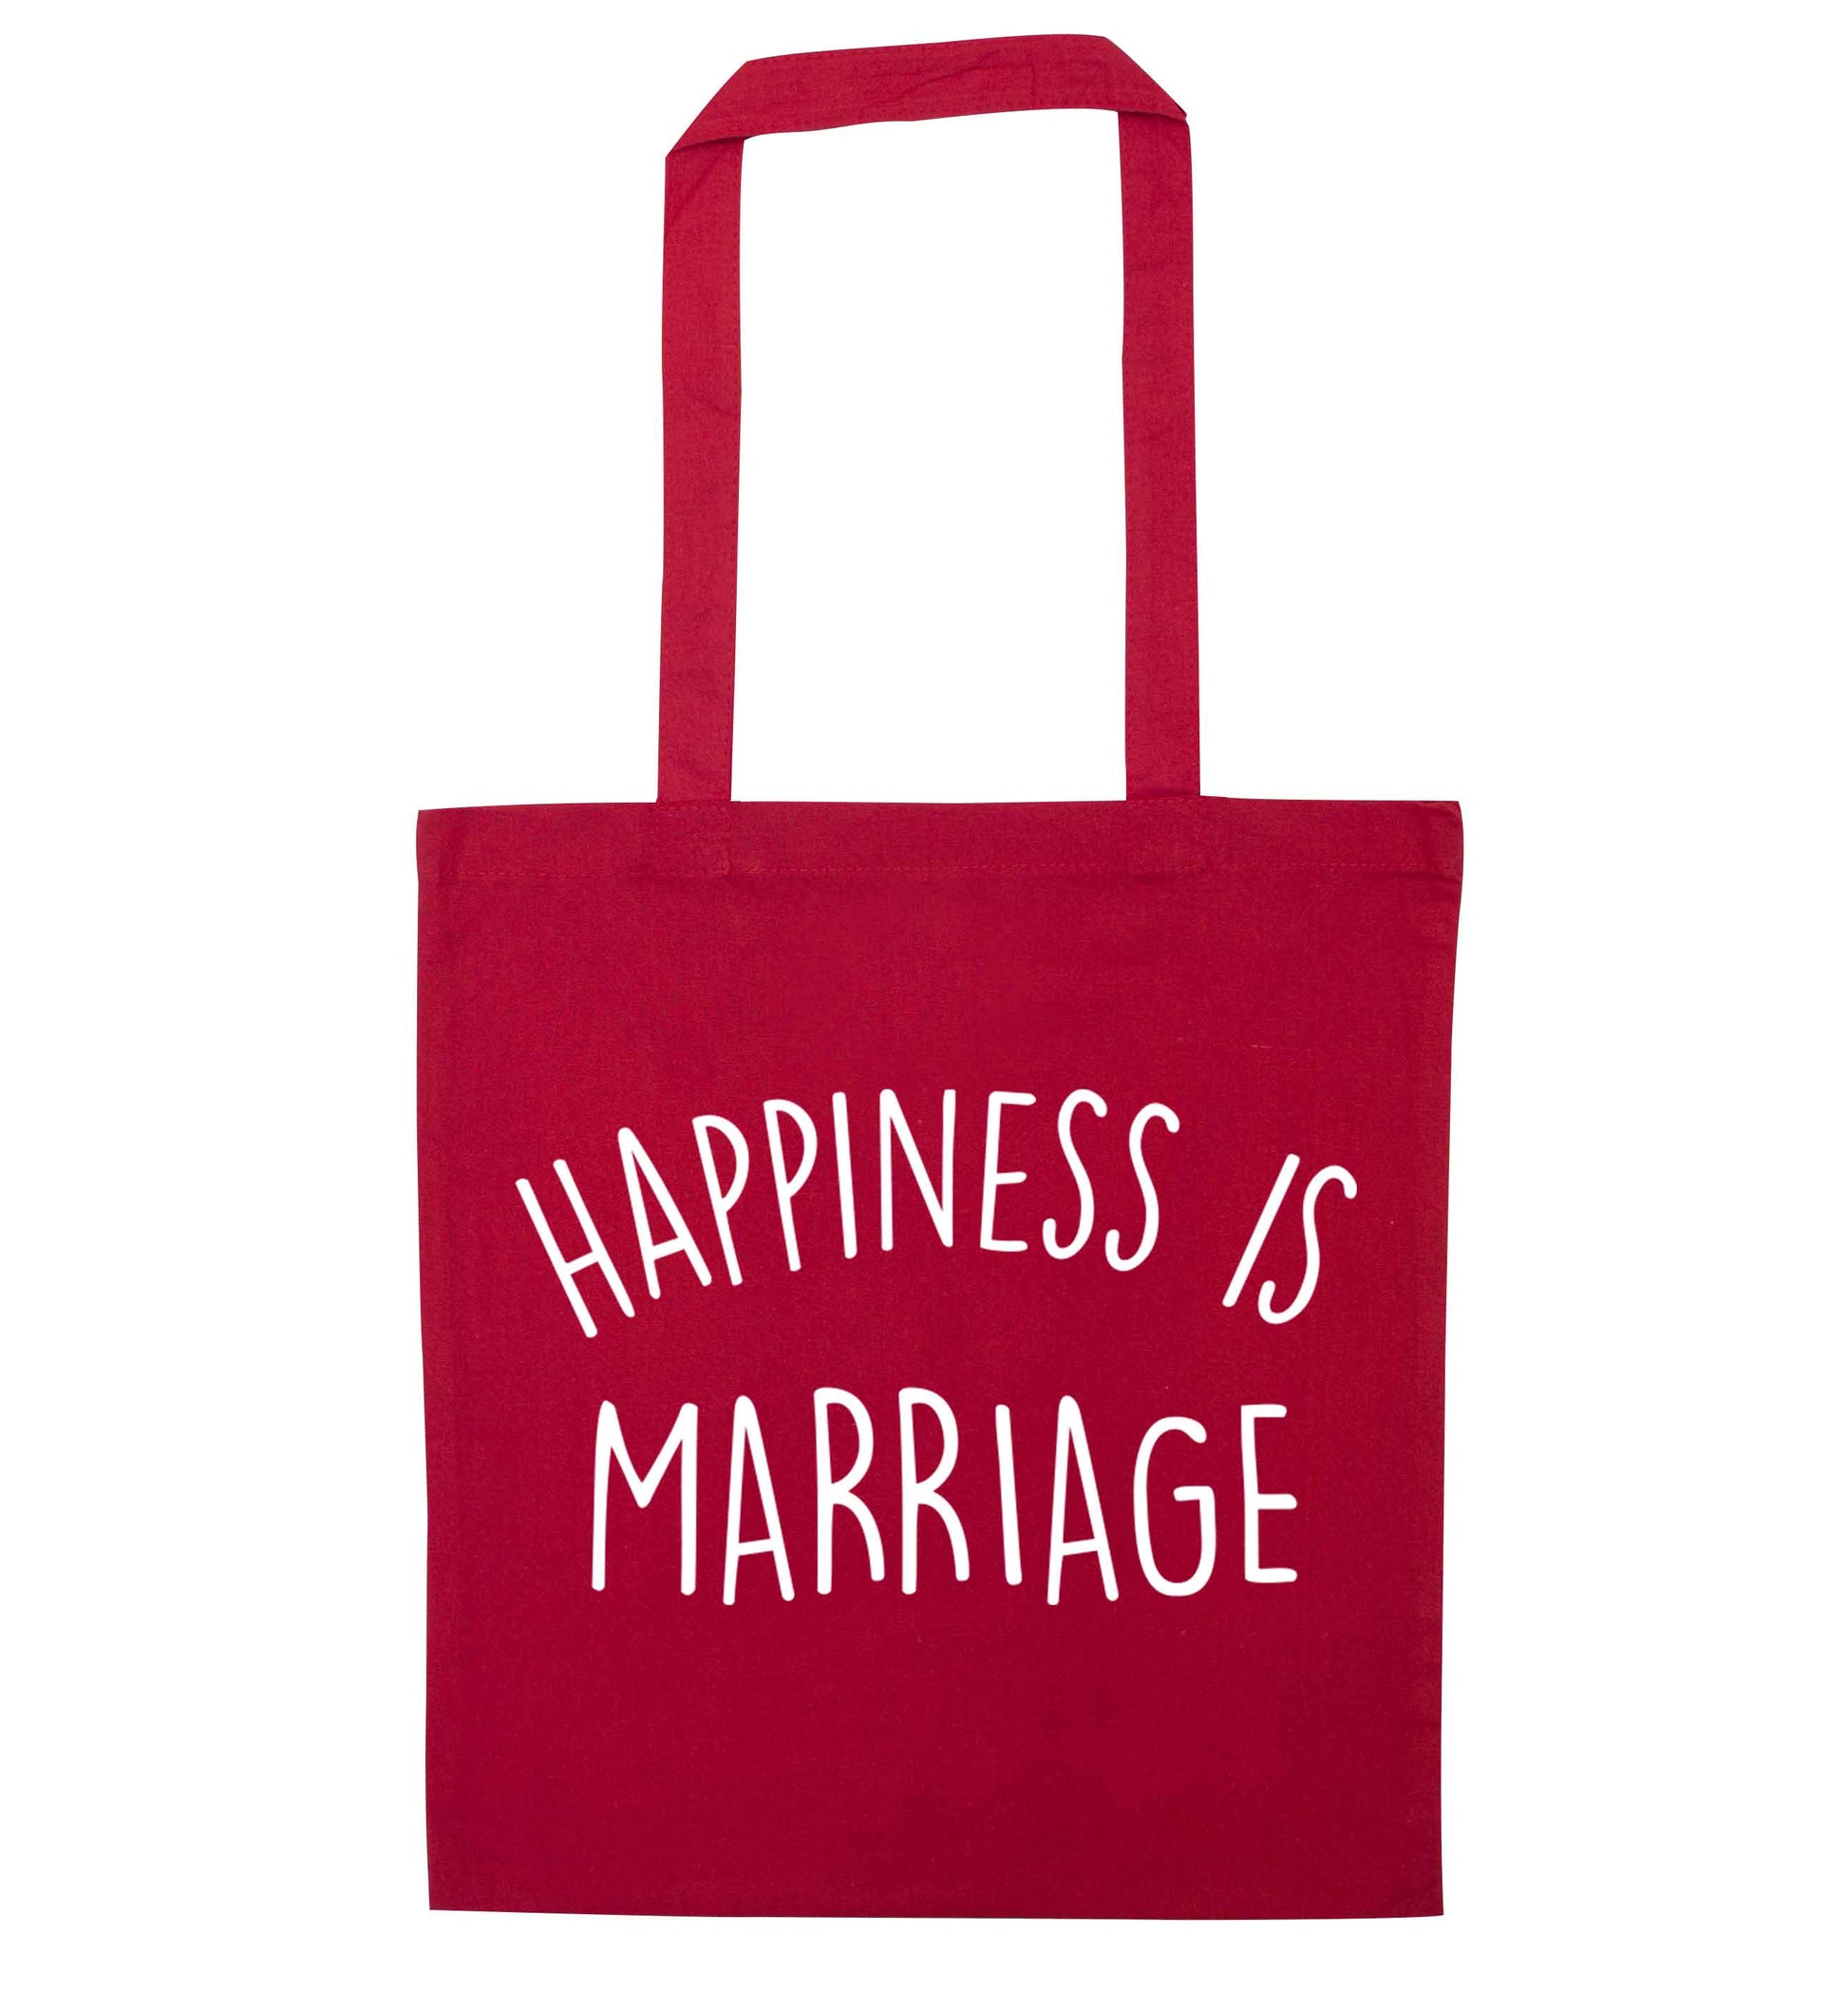 Happiness is wedding planning red tote bag